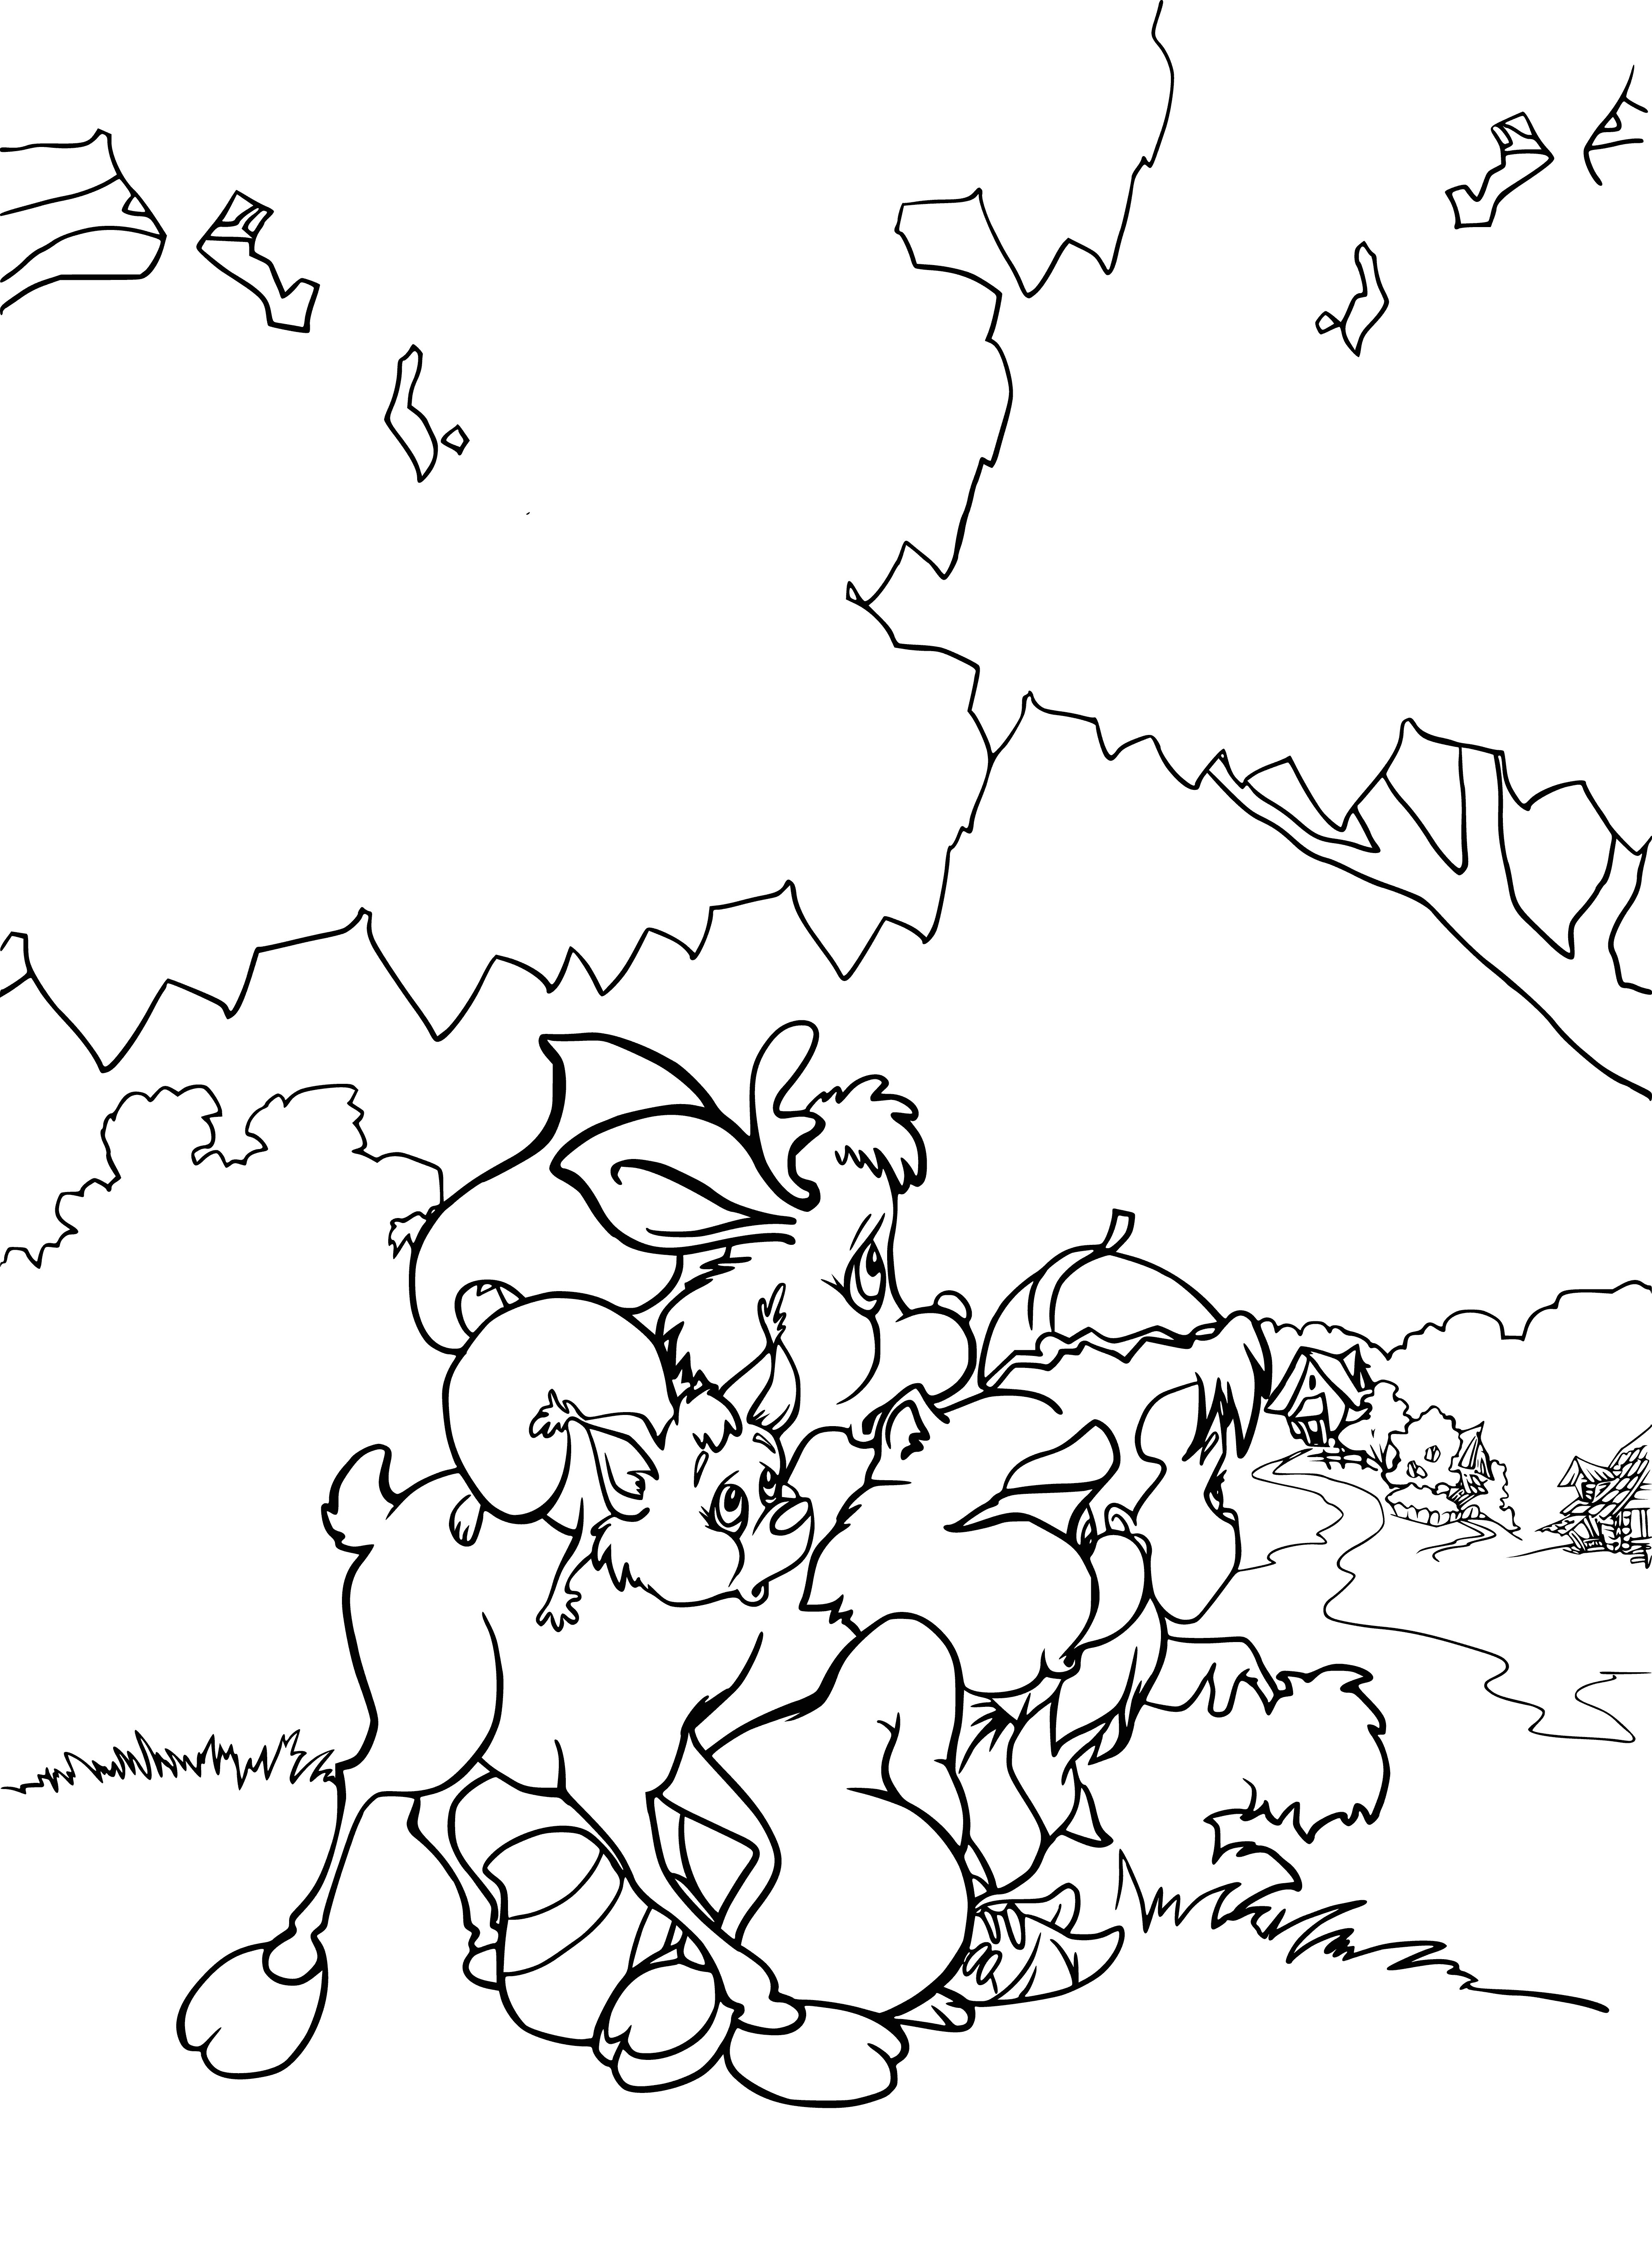 Look at the village coloring page